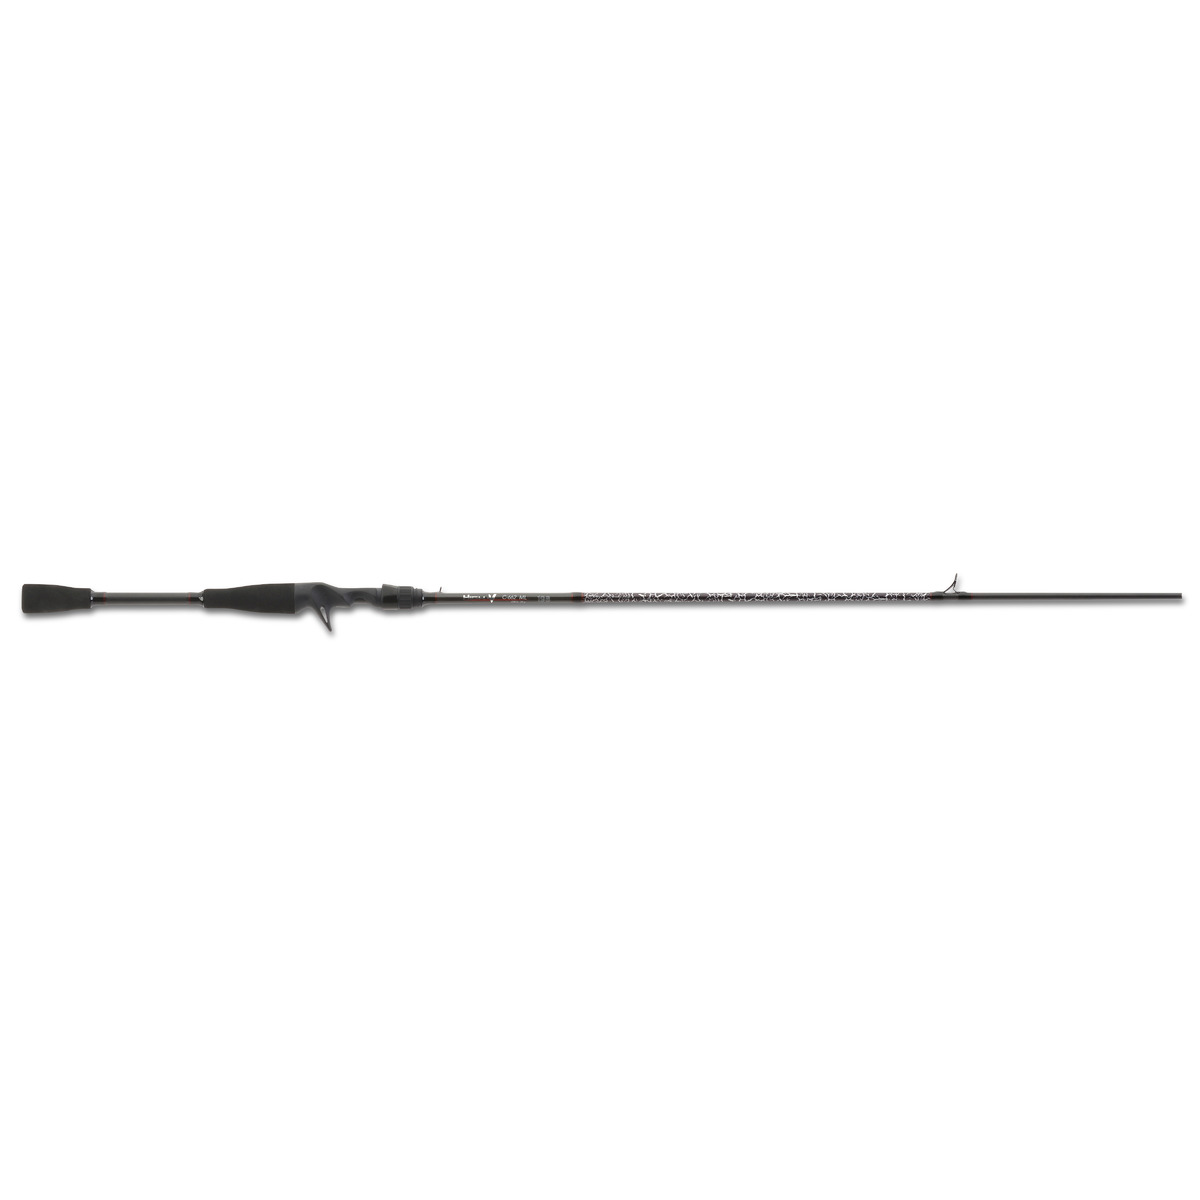 Iron Claw High-v Pike - C-702MH 213 16-48 g